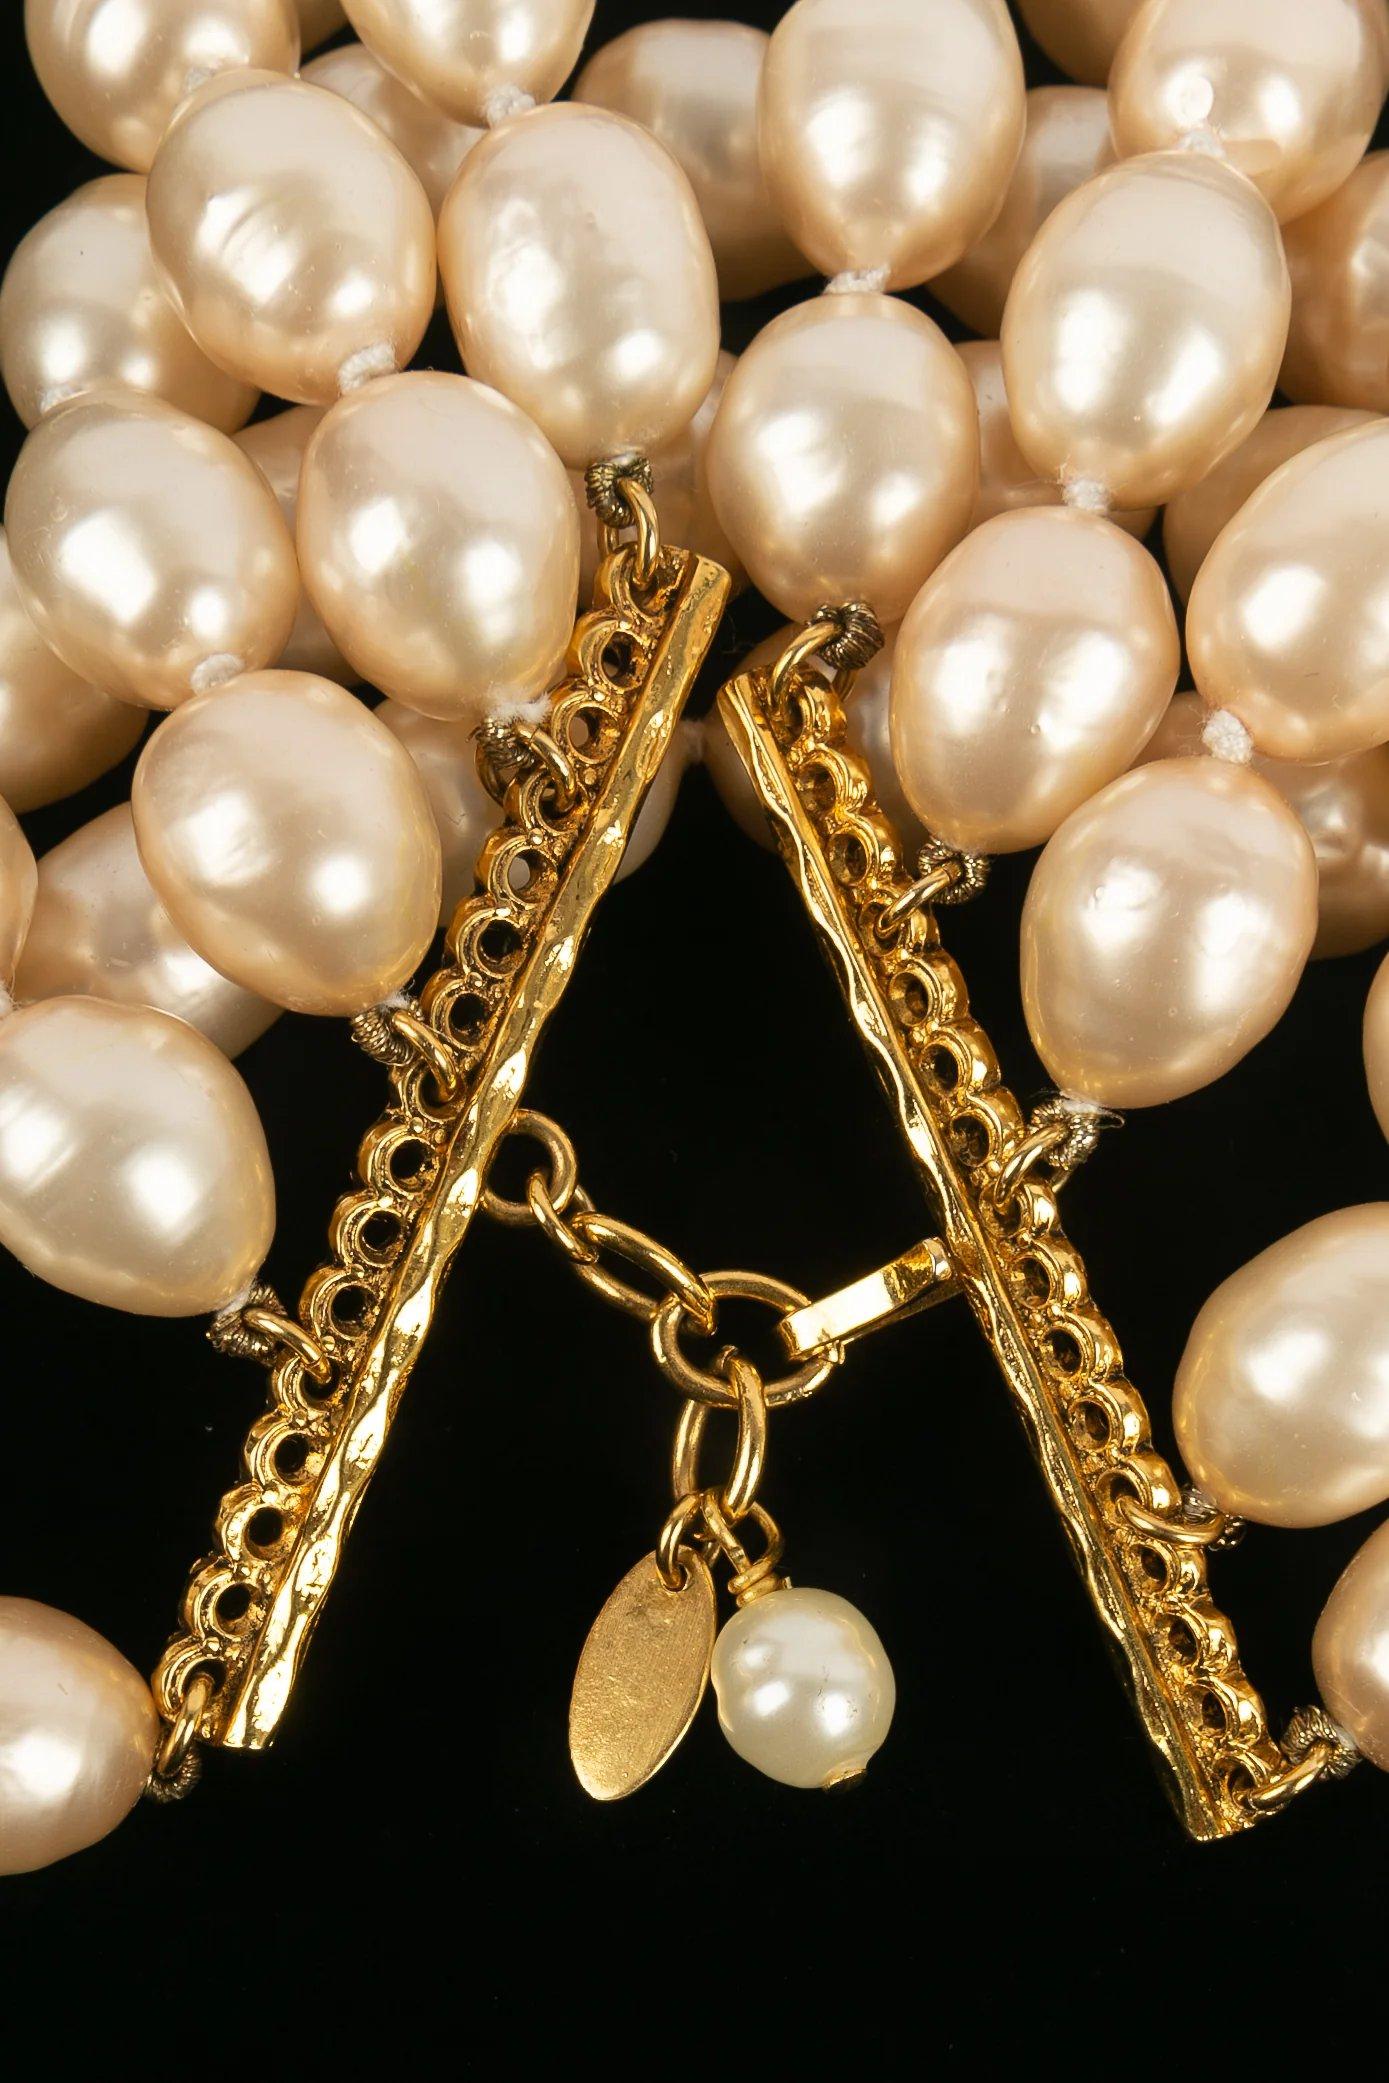 Chanel -(Made in France) Chanel pearl bracelet.

Additional information:

Dimensions: 19-22 L cm
Width: 6 cm
Condition: Very good condition

Seller Ref number: BRAB82